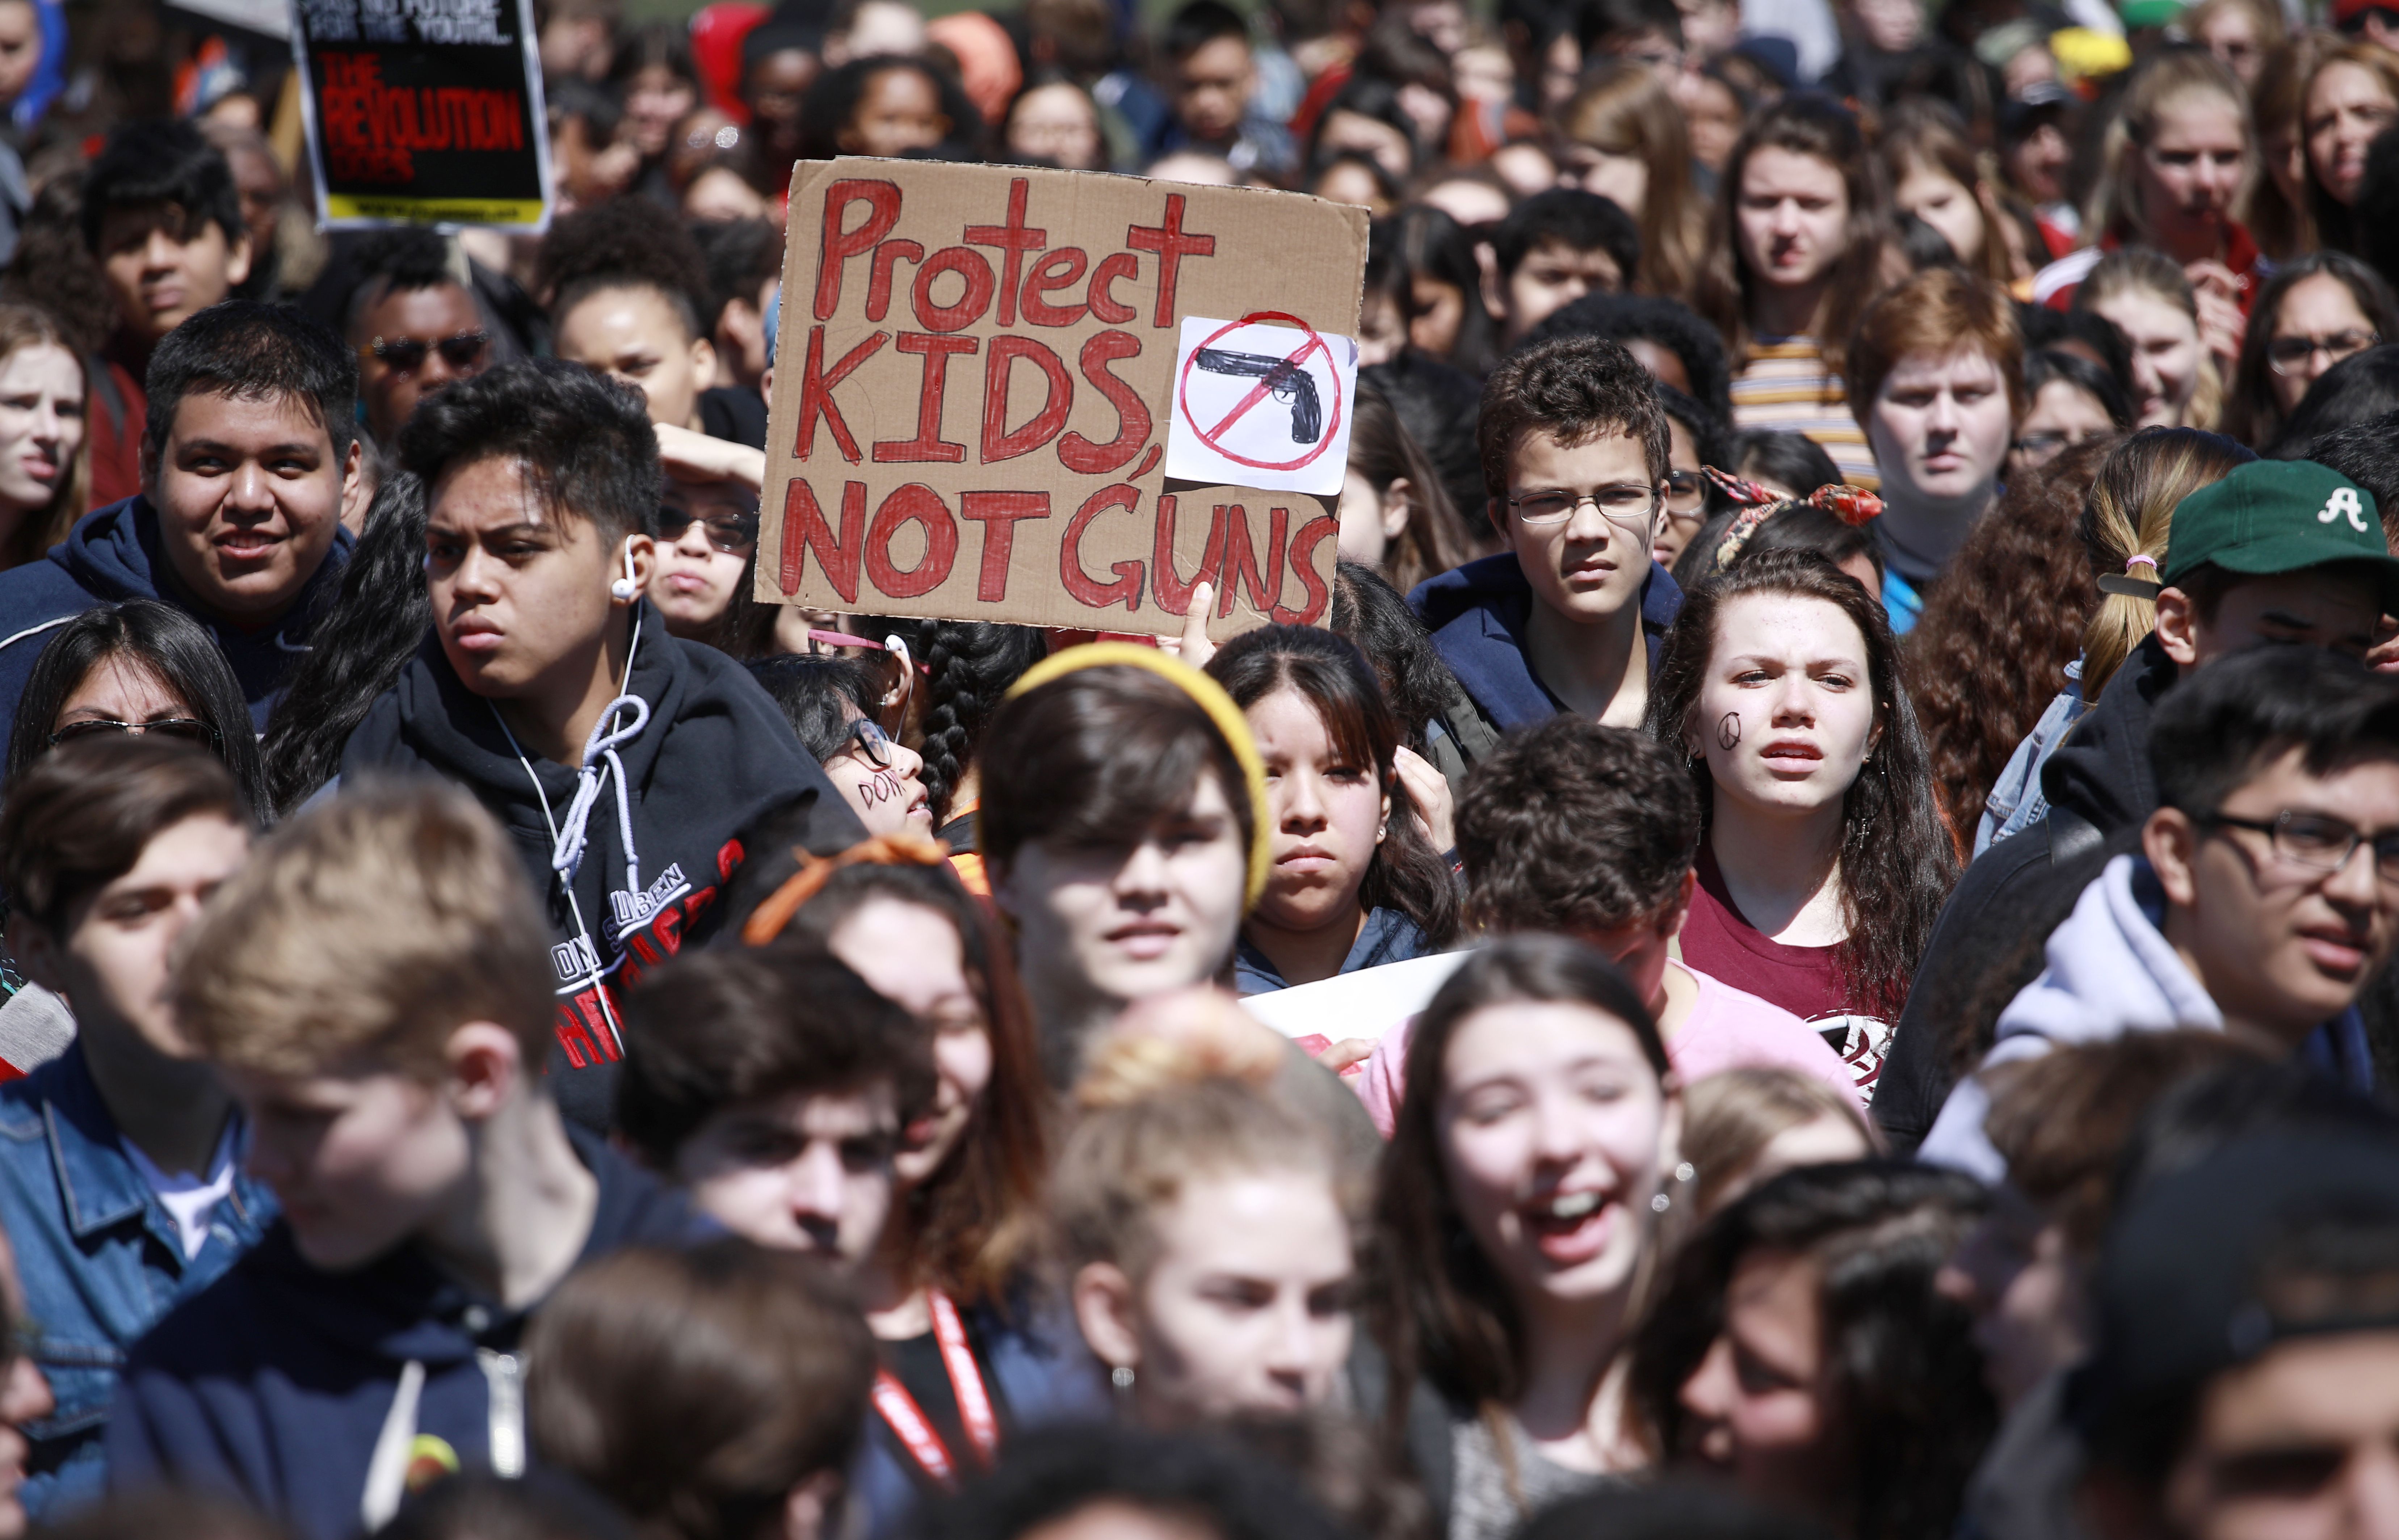 Students in Chicago participate in protests against school violence on April 20.